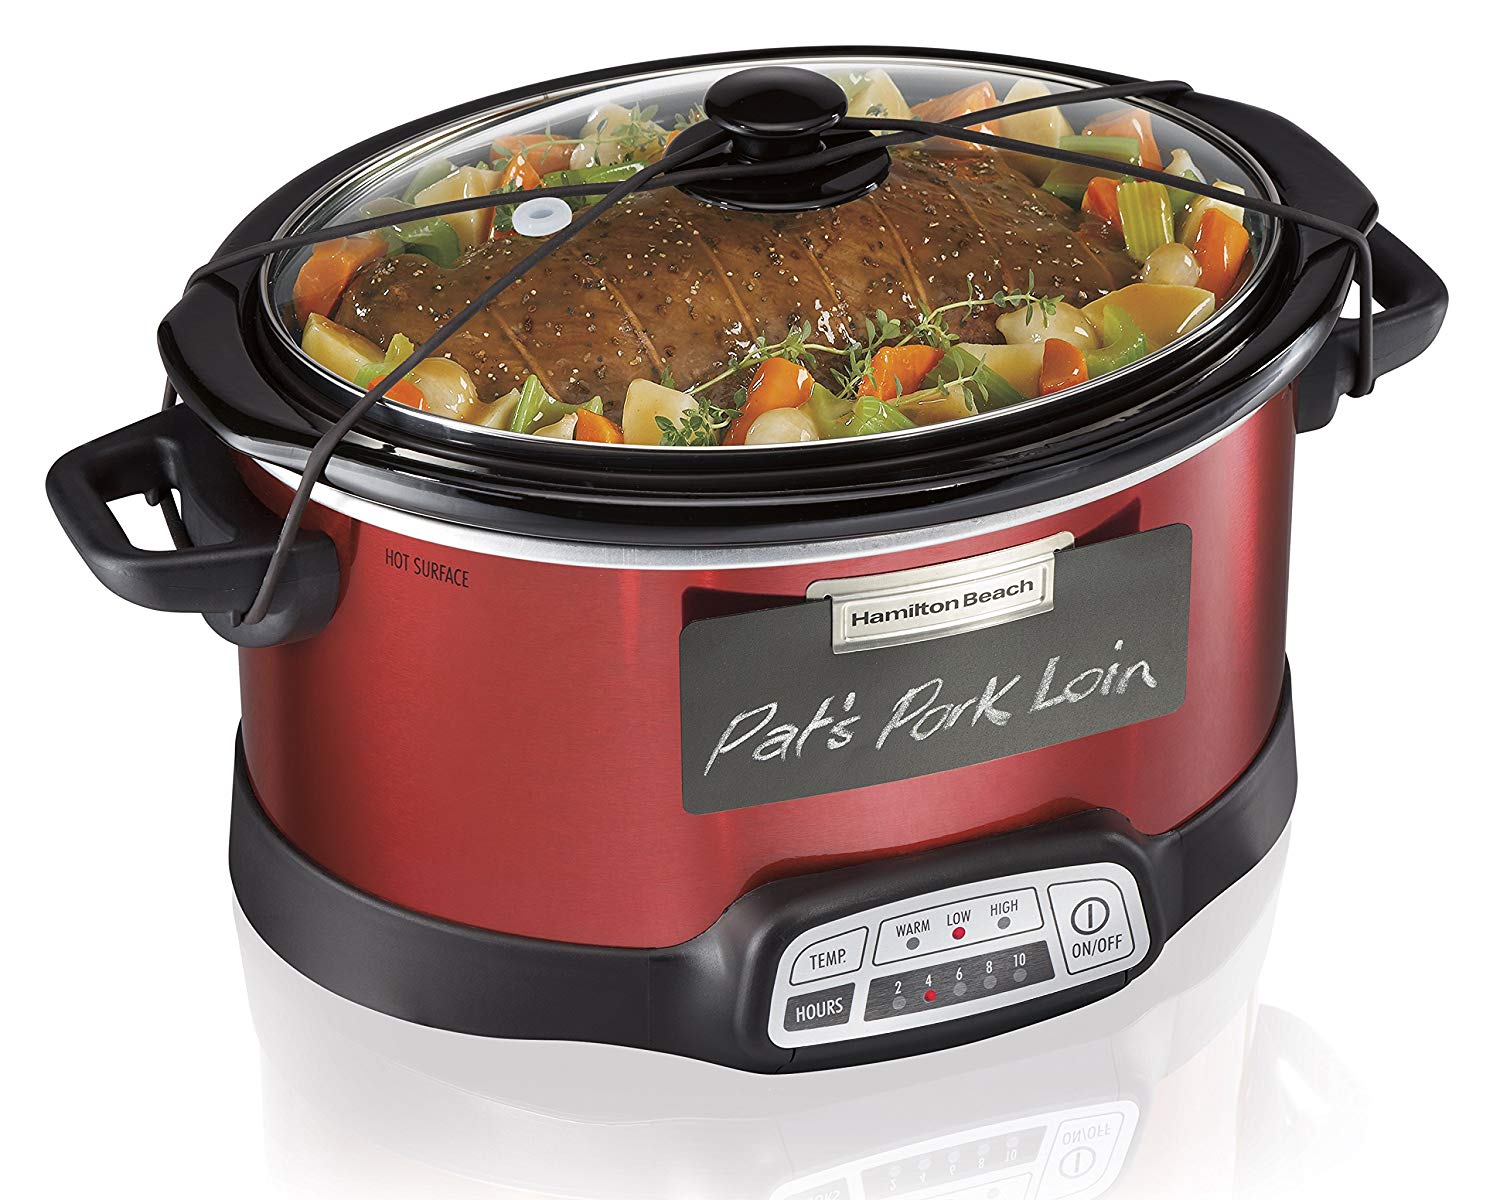 Hamilton Beach Programmable Slow Cooker With Lid Latch Strap and Chalkboard Panels